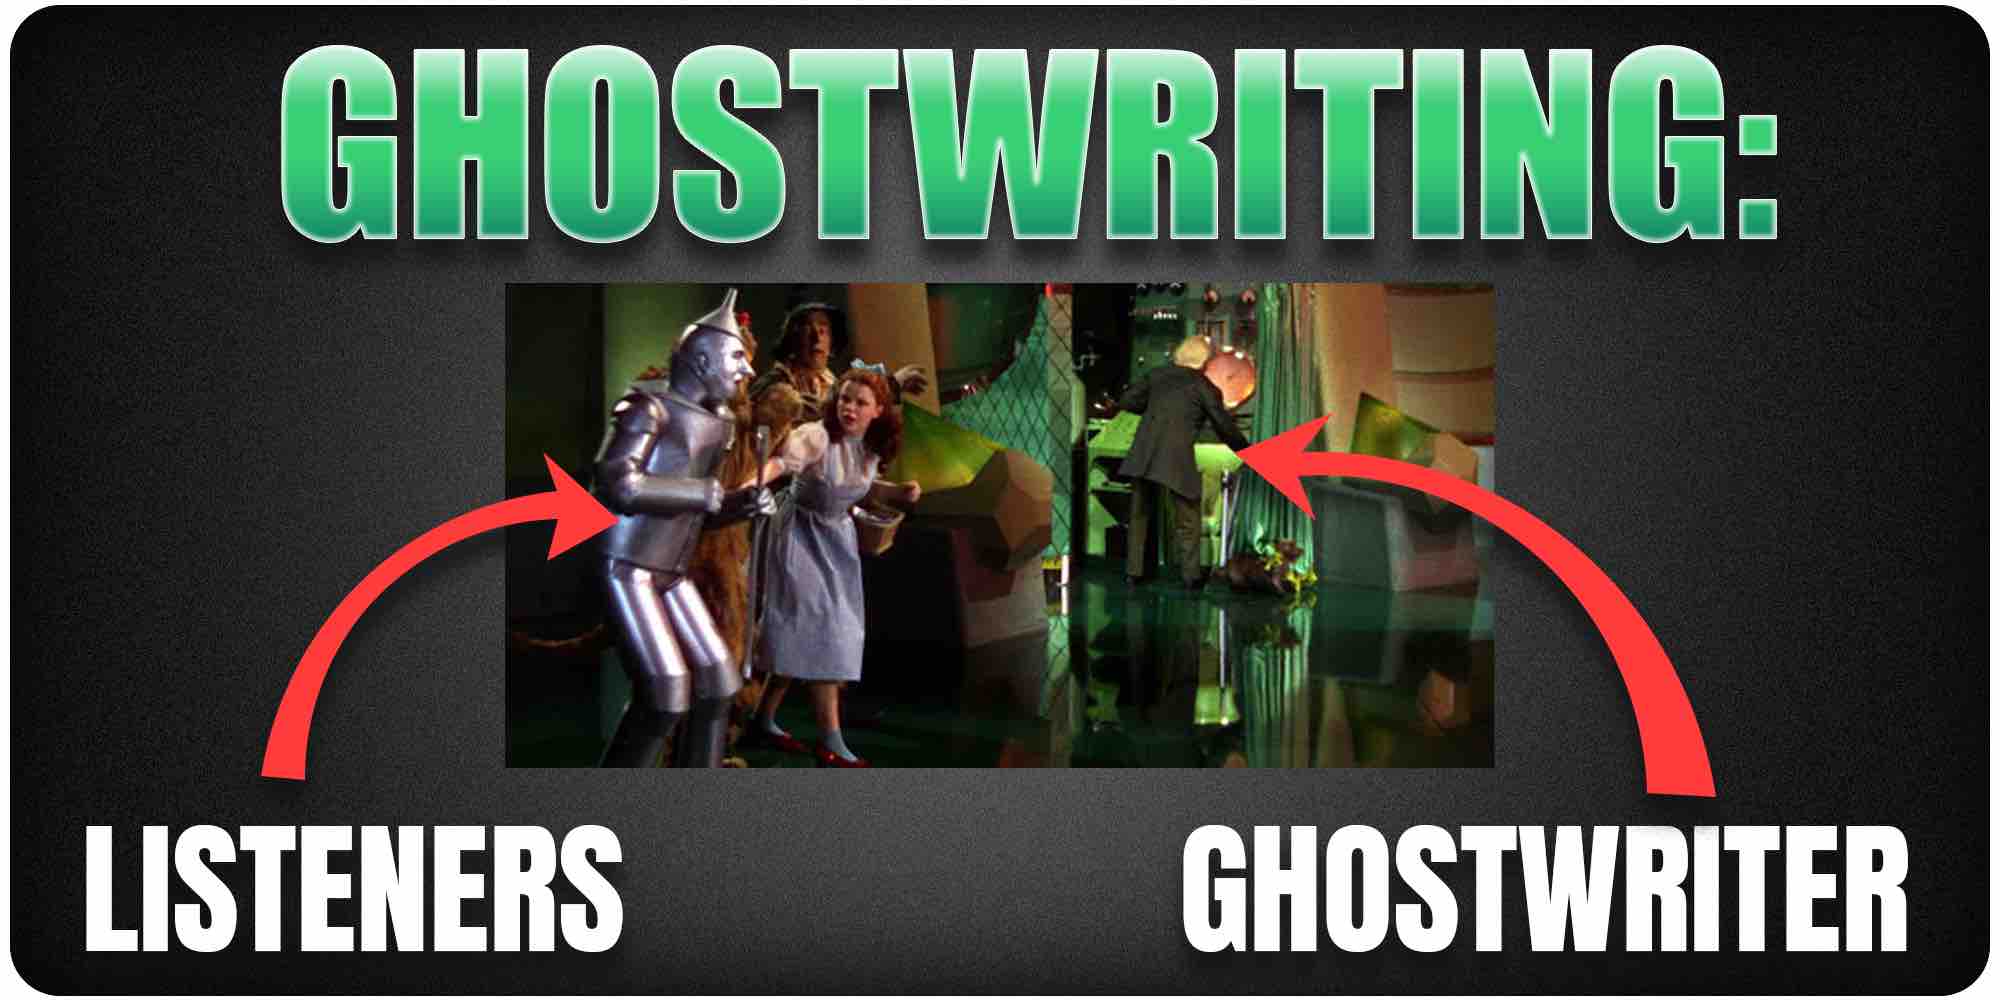 Ghostwriters are like the Wizard of Oz